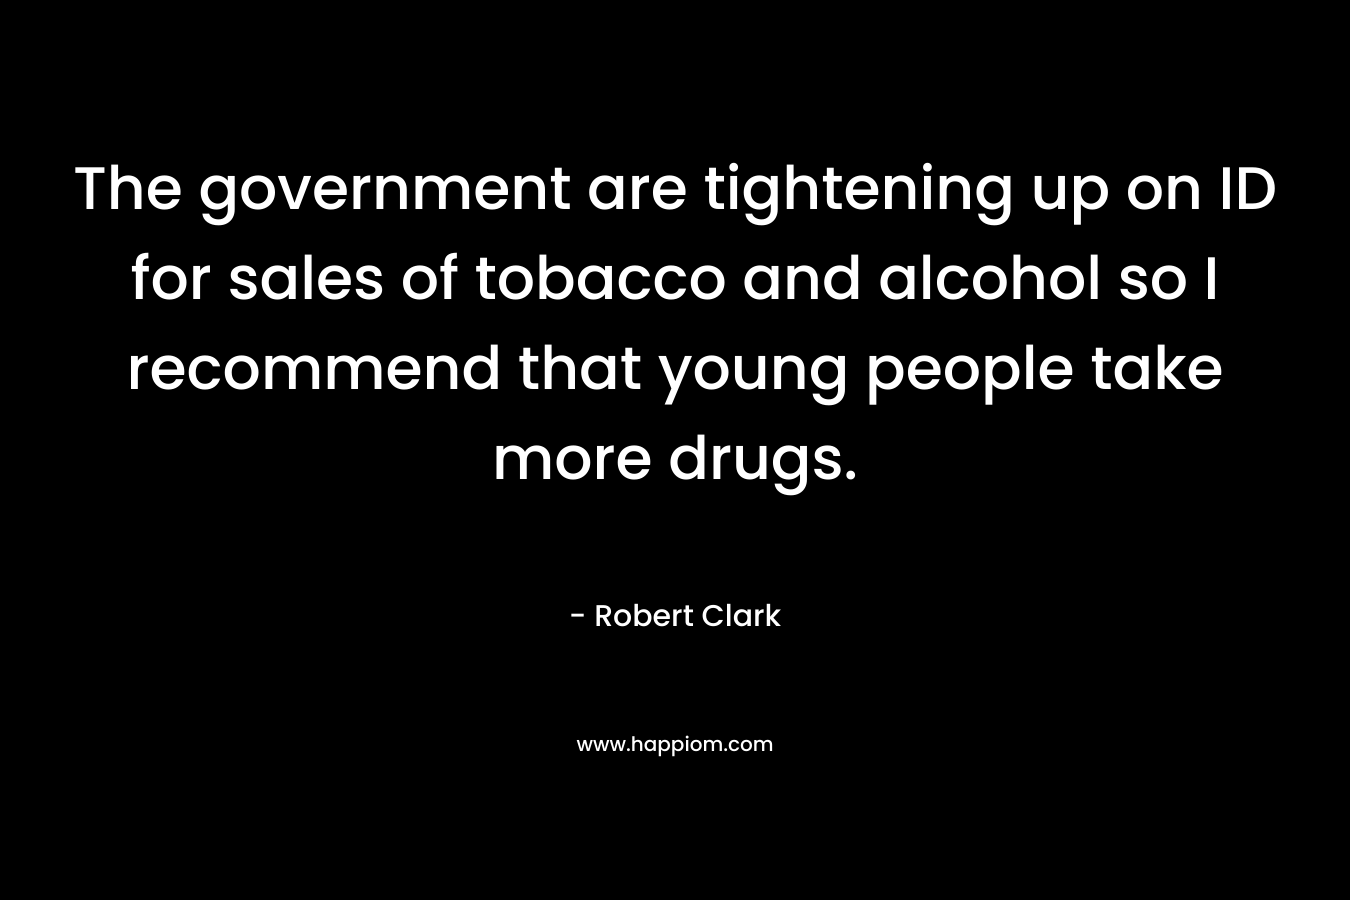 The government are tightening up on ID for sales of tobacco and alcohol so I recommend that young people take more drugs. – Robert Clark